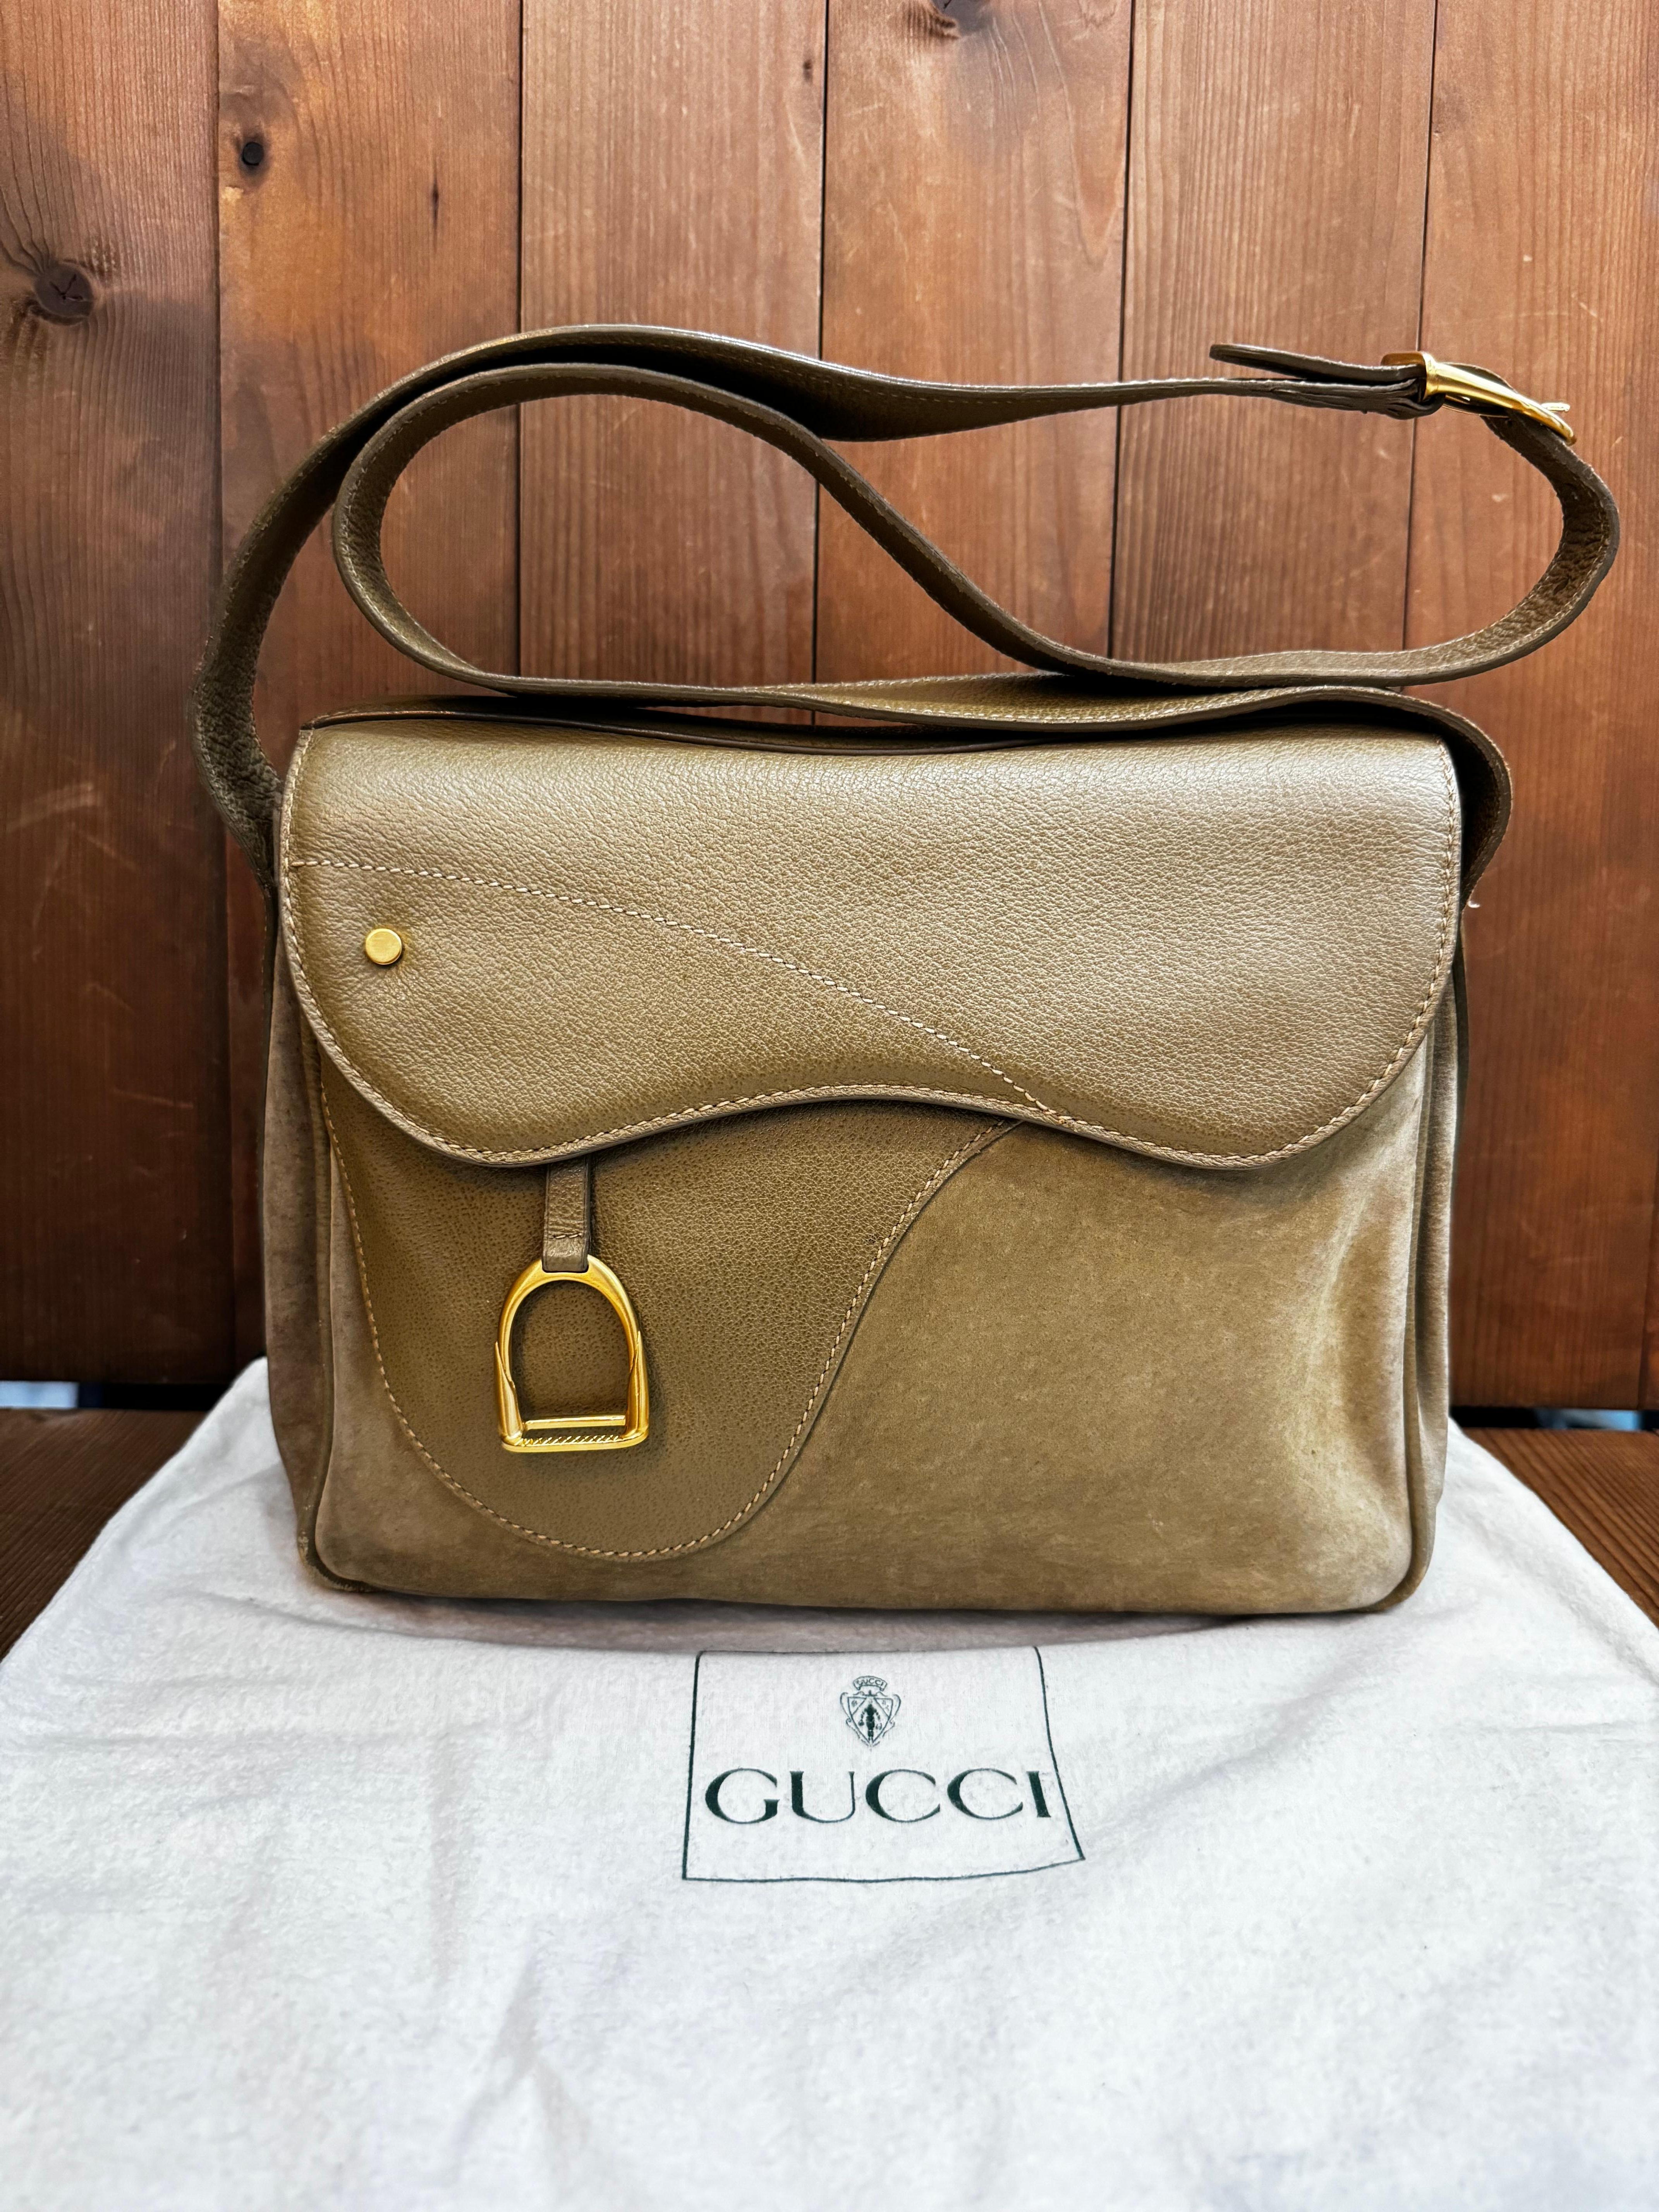 This vintage GUCCI saddle camera bag is crafted of nubuck and pigskin leather in khaki featuring matte gold toned hardware. Front flap double magnetic snap closure opens to a khaki diamanté jacquard interior featuring three compartments with a